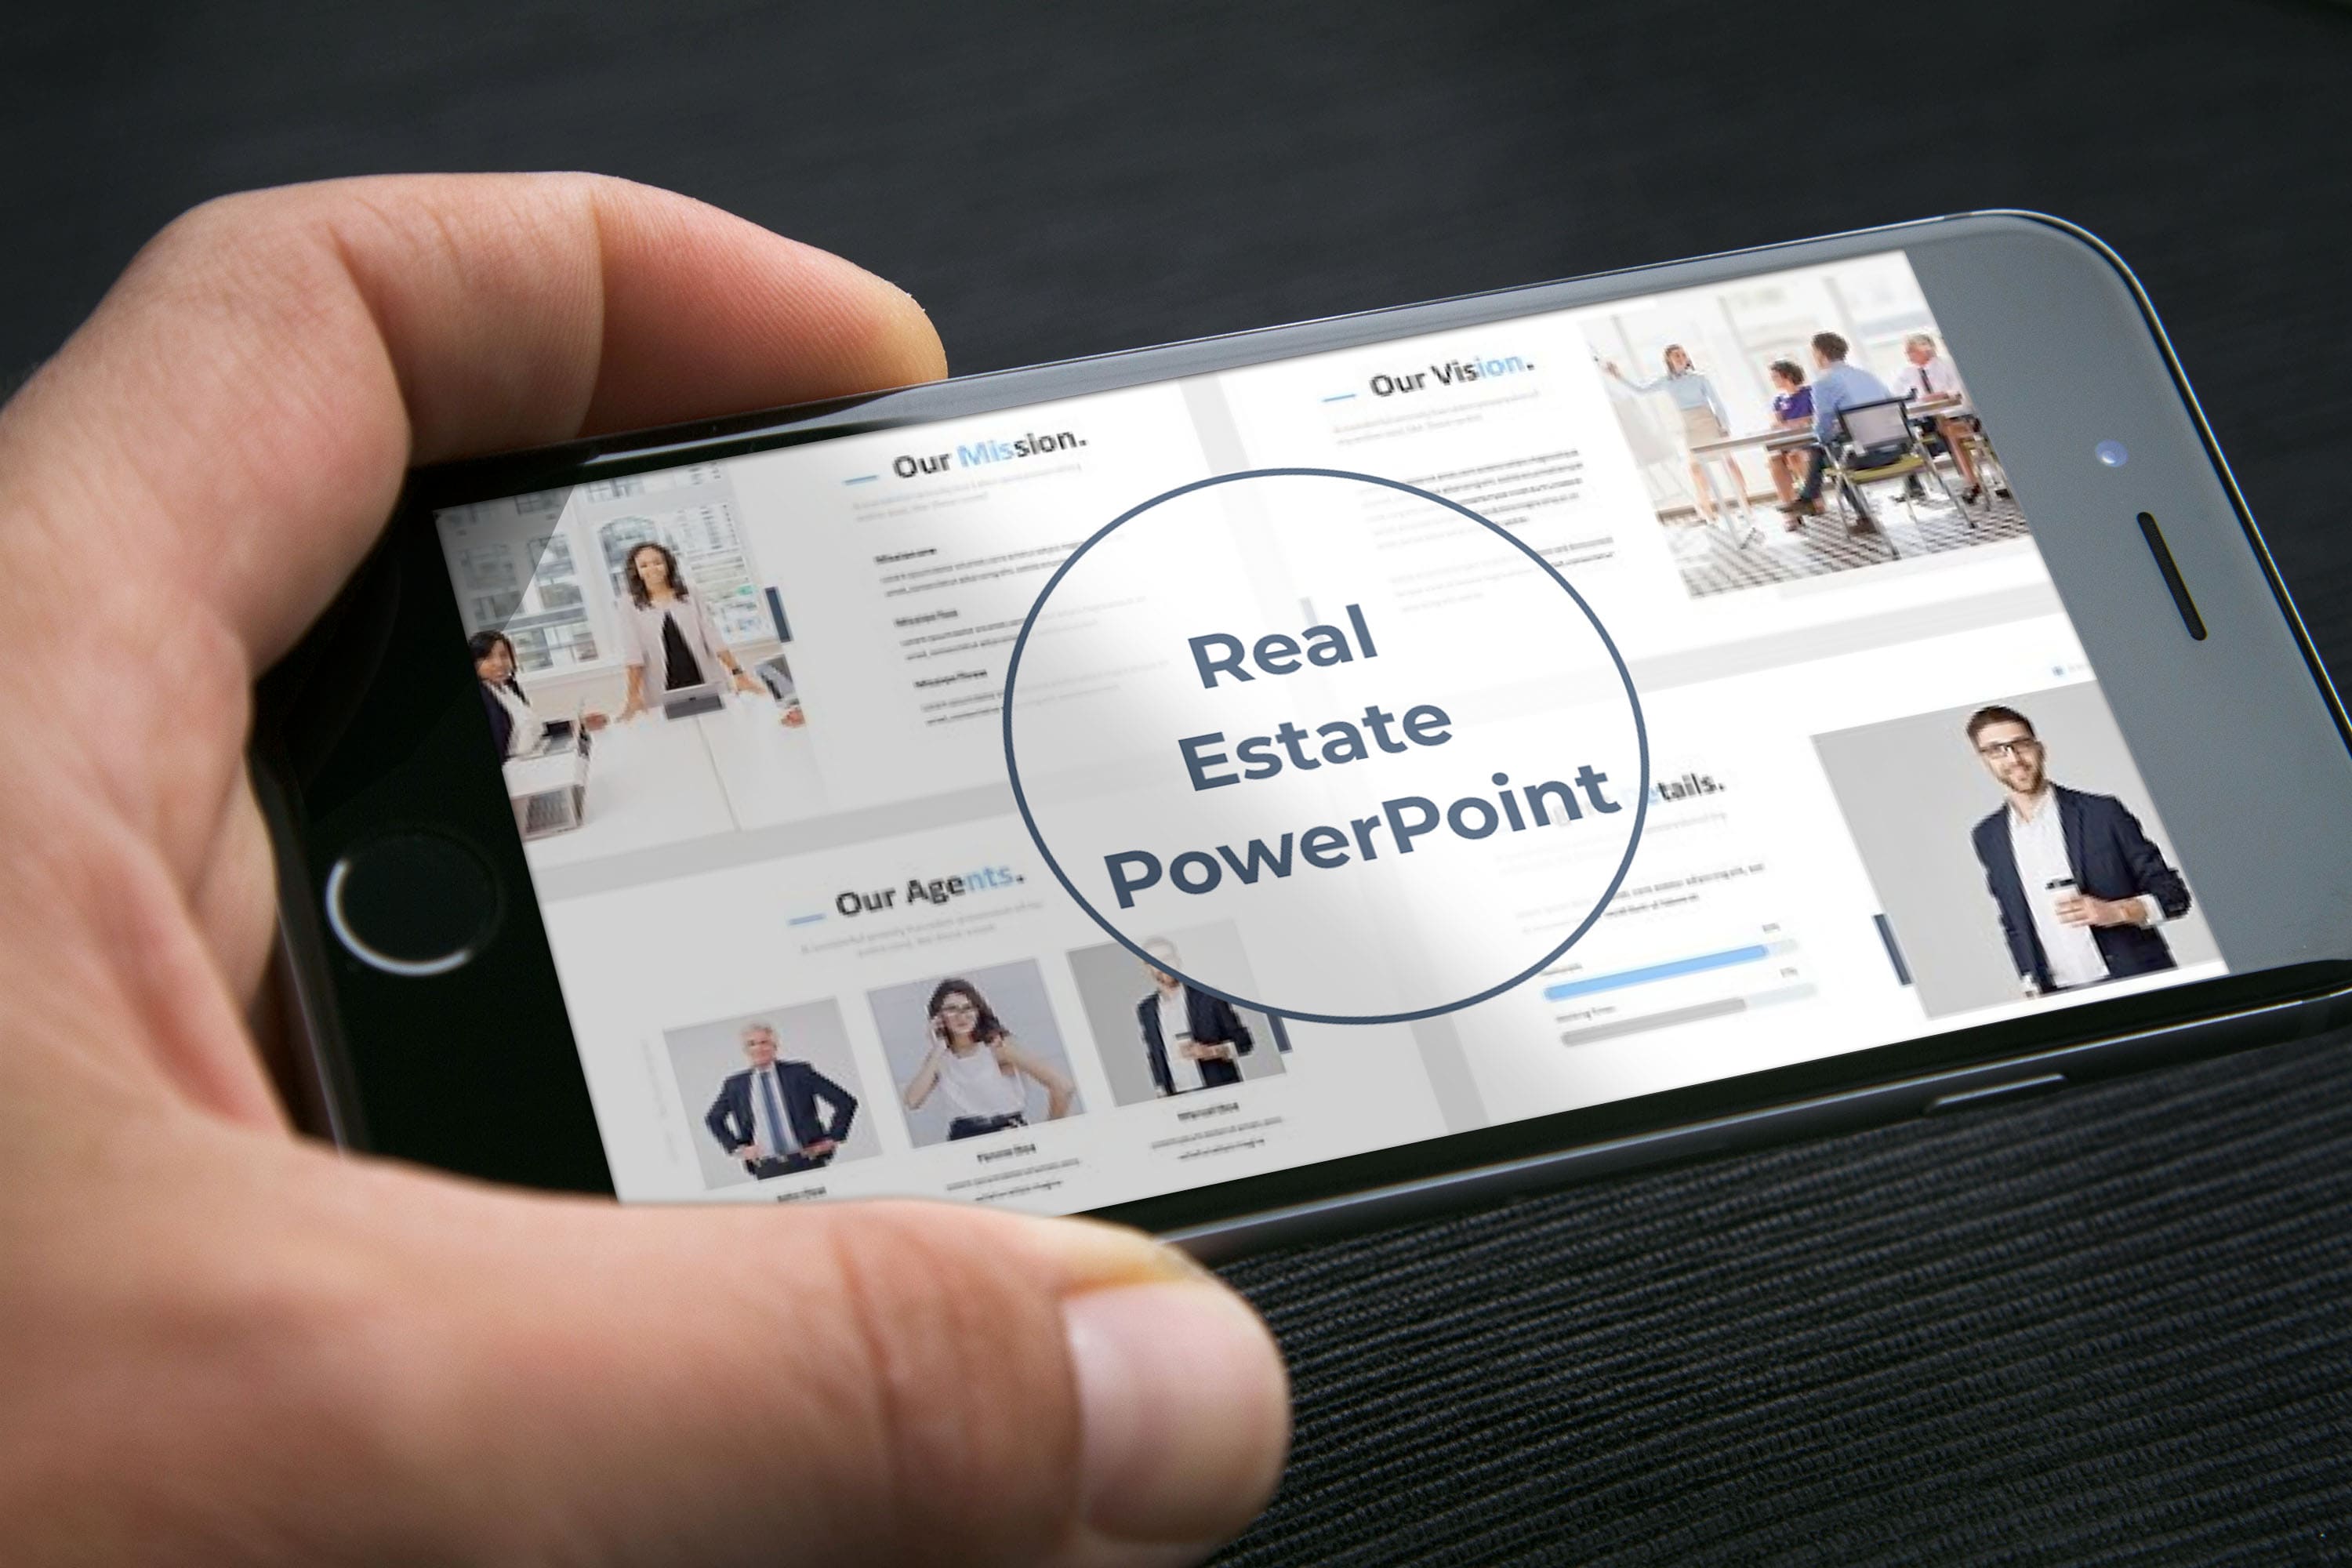 Real Estate Powerpoint Template by MasterBundles mobile preview mockup image.